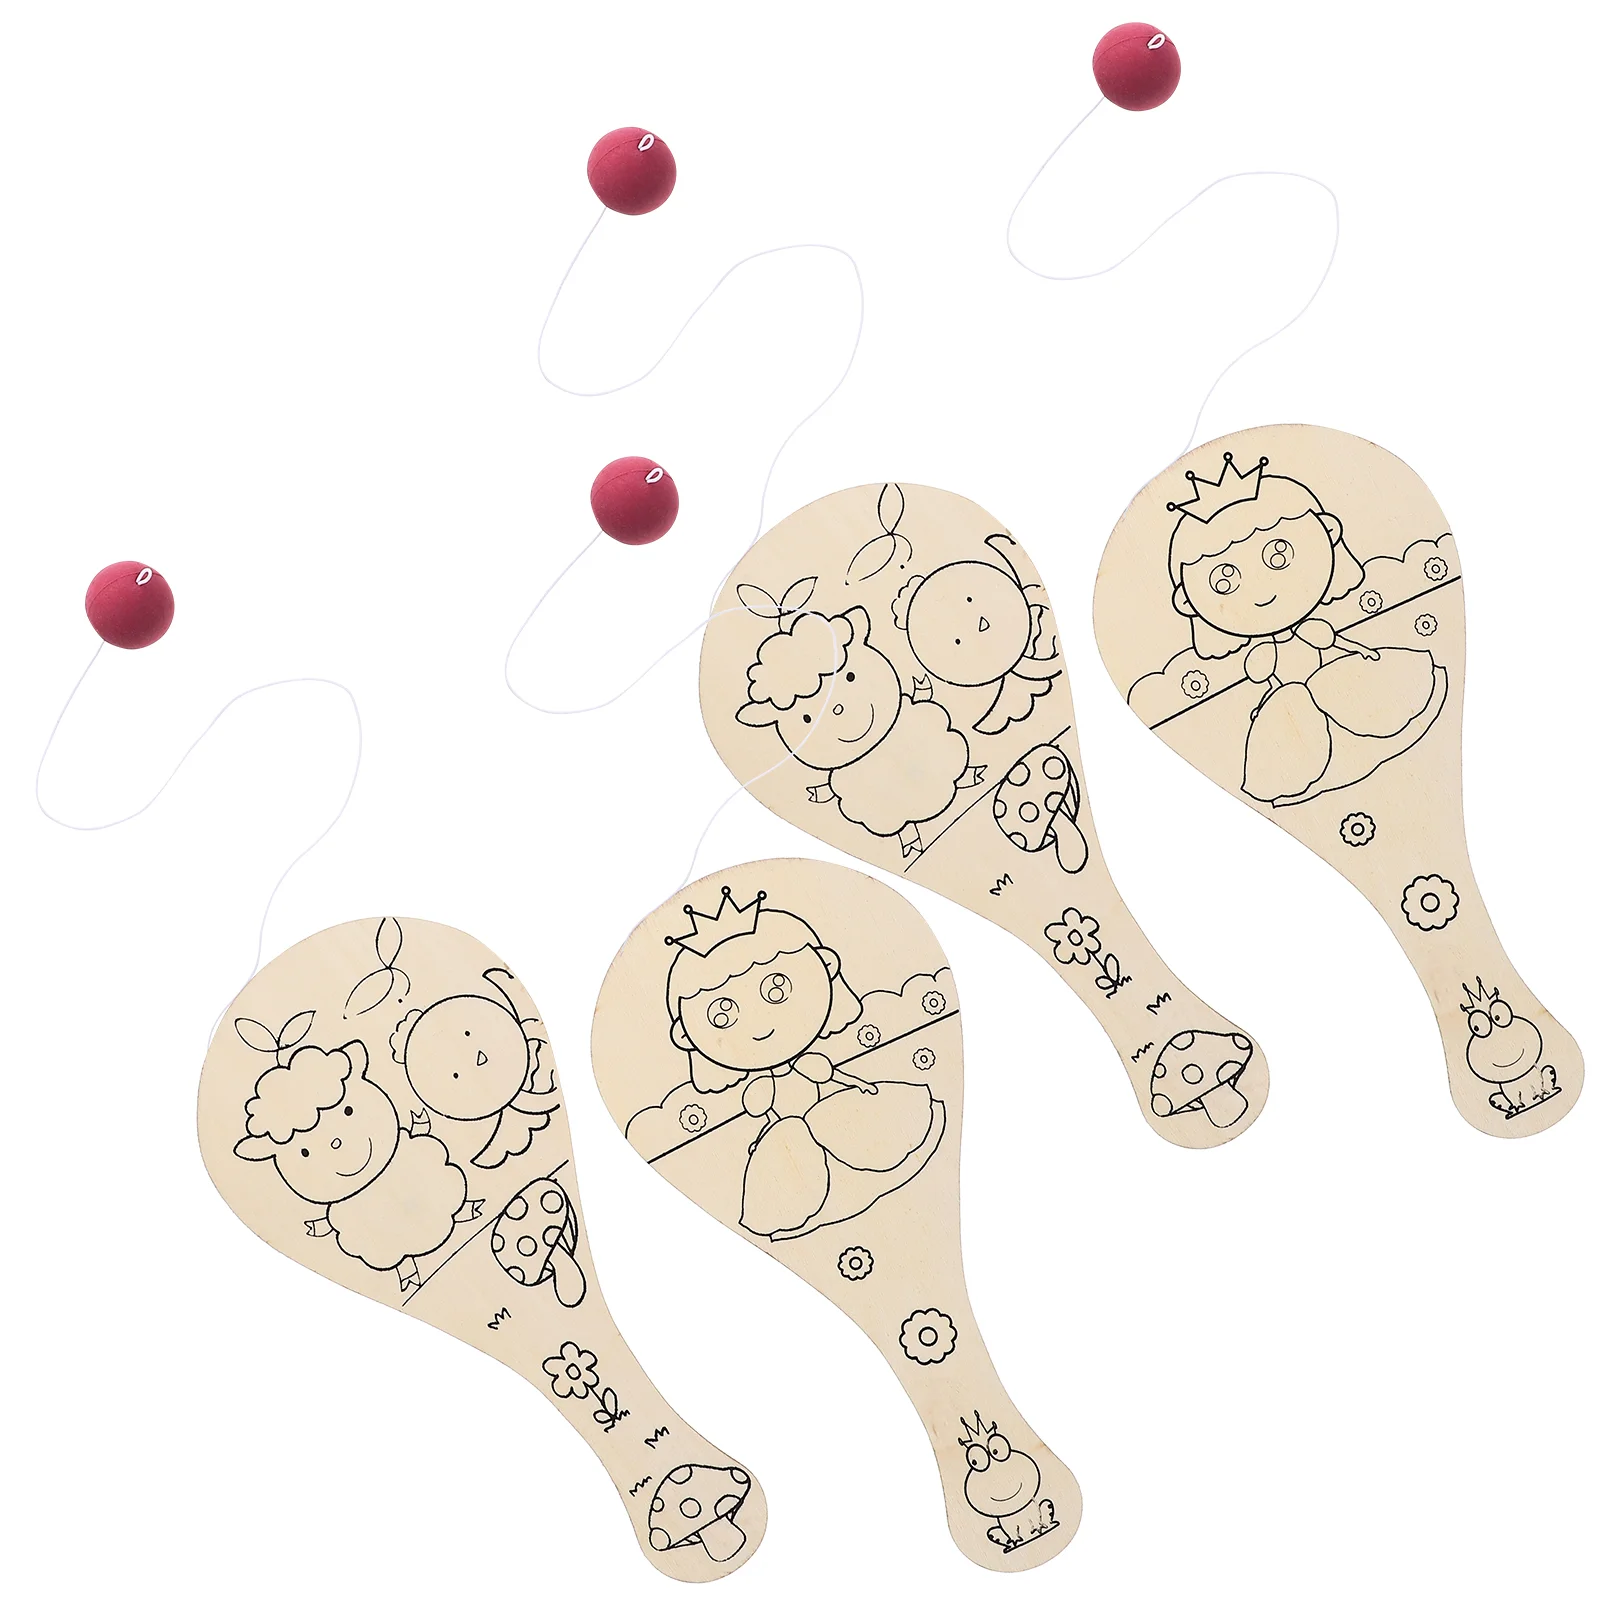 

4 Pcs Graffiti Blank Racket Doodle Board Unfinished Wood Paddle Catch The Ball Paint Draw Toy Wooden Painting Child Kids